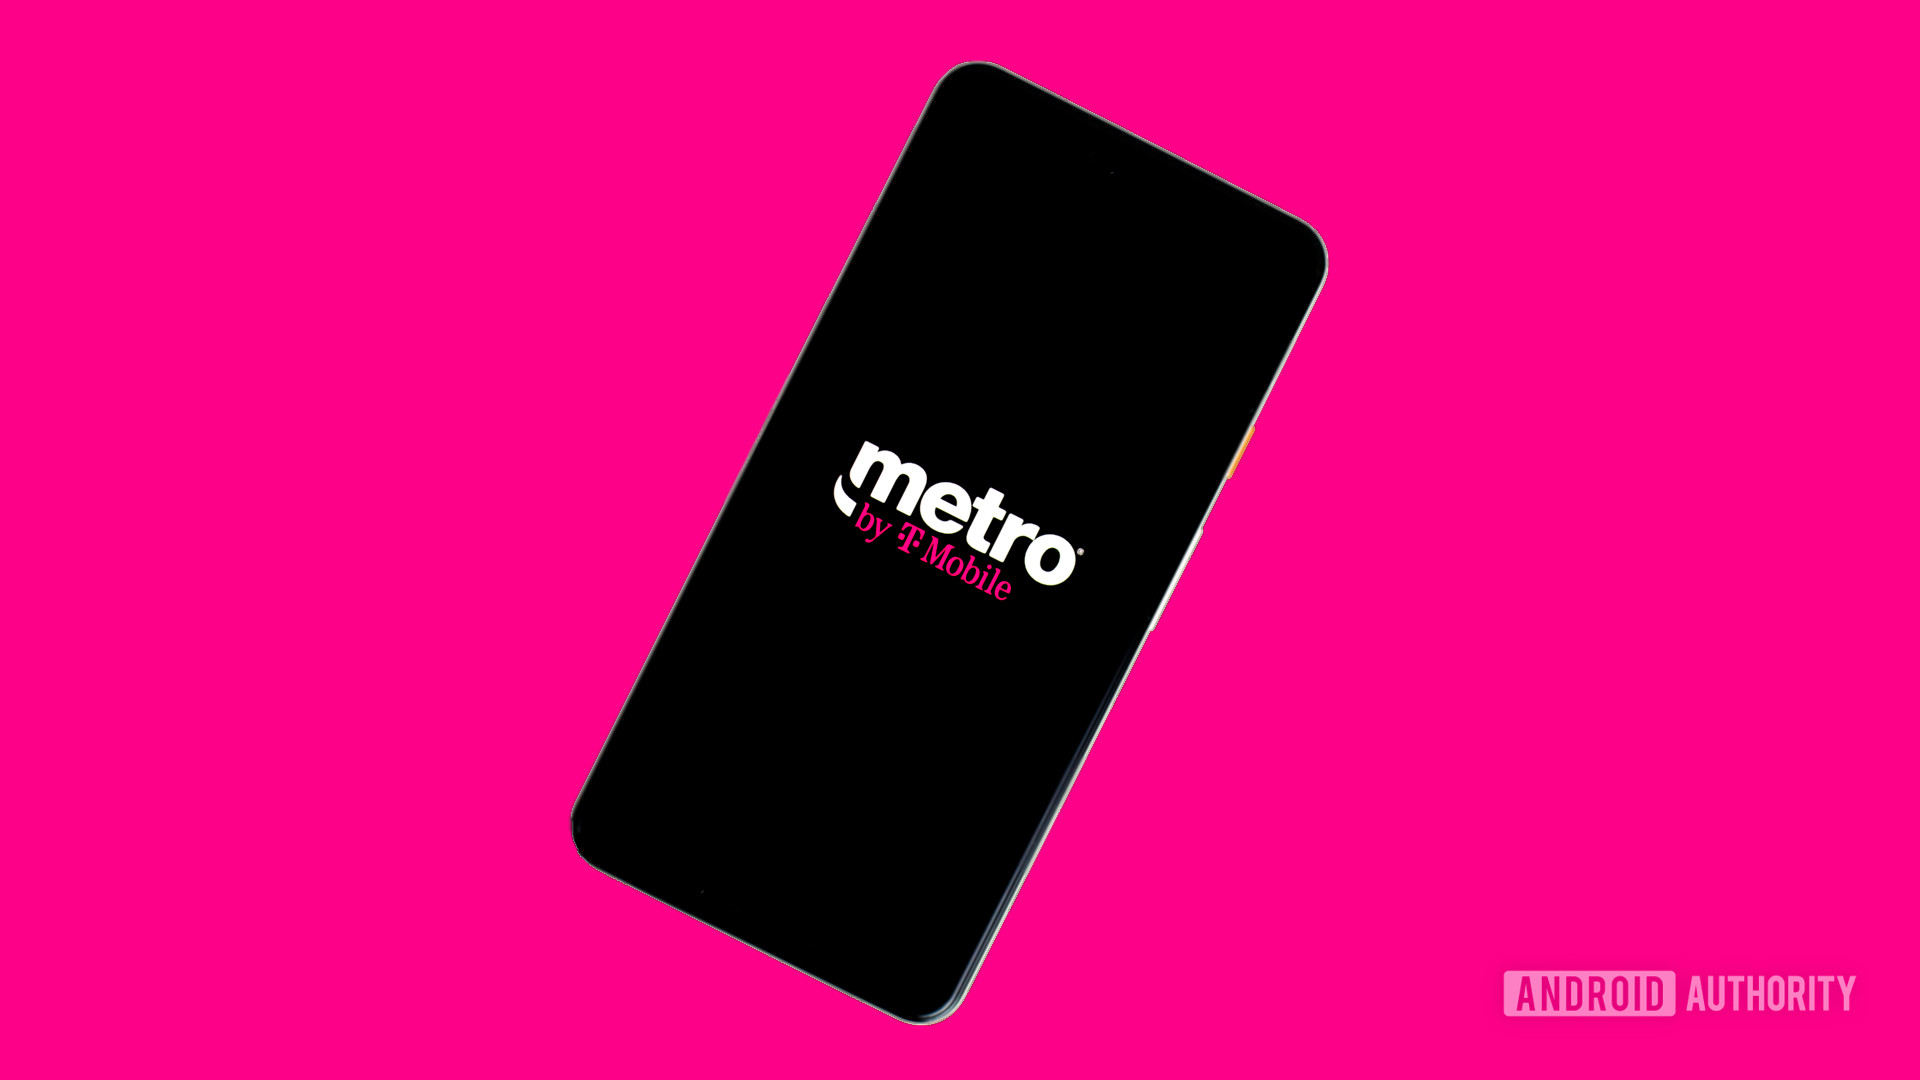 Metro By T Mobile徽标在电话库存照片1